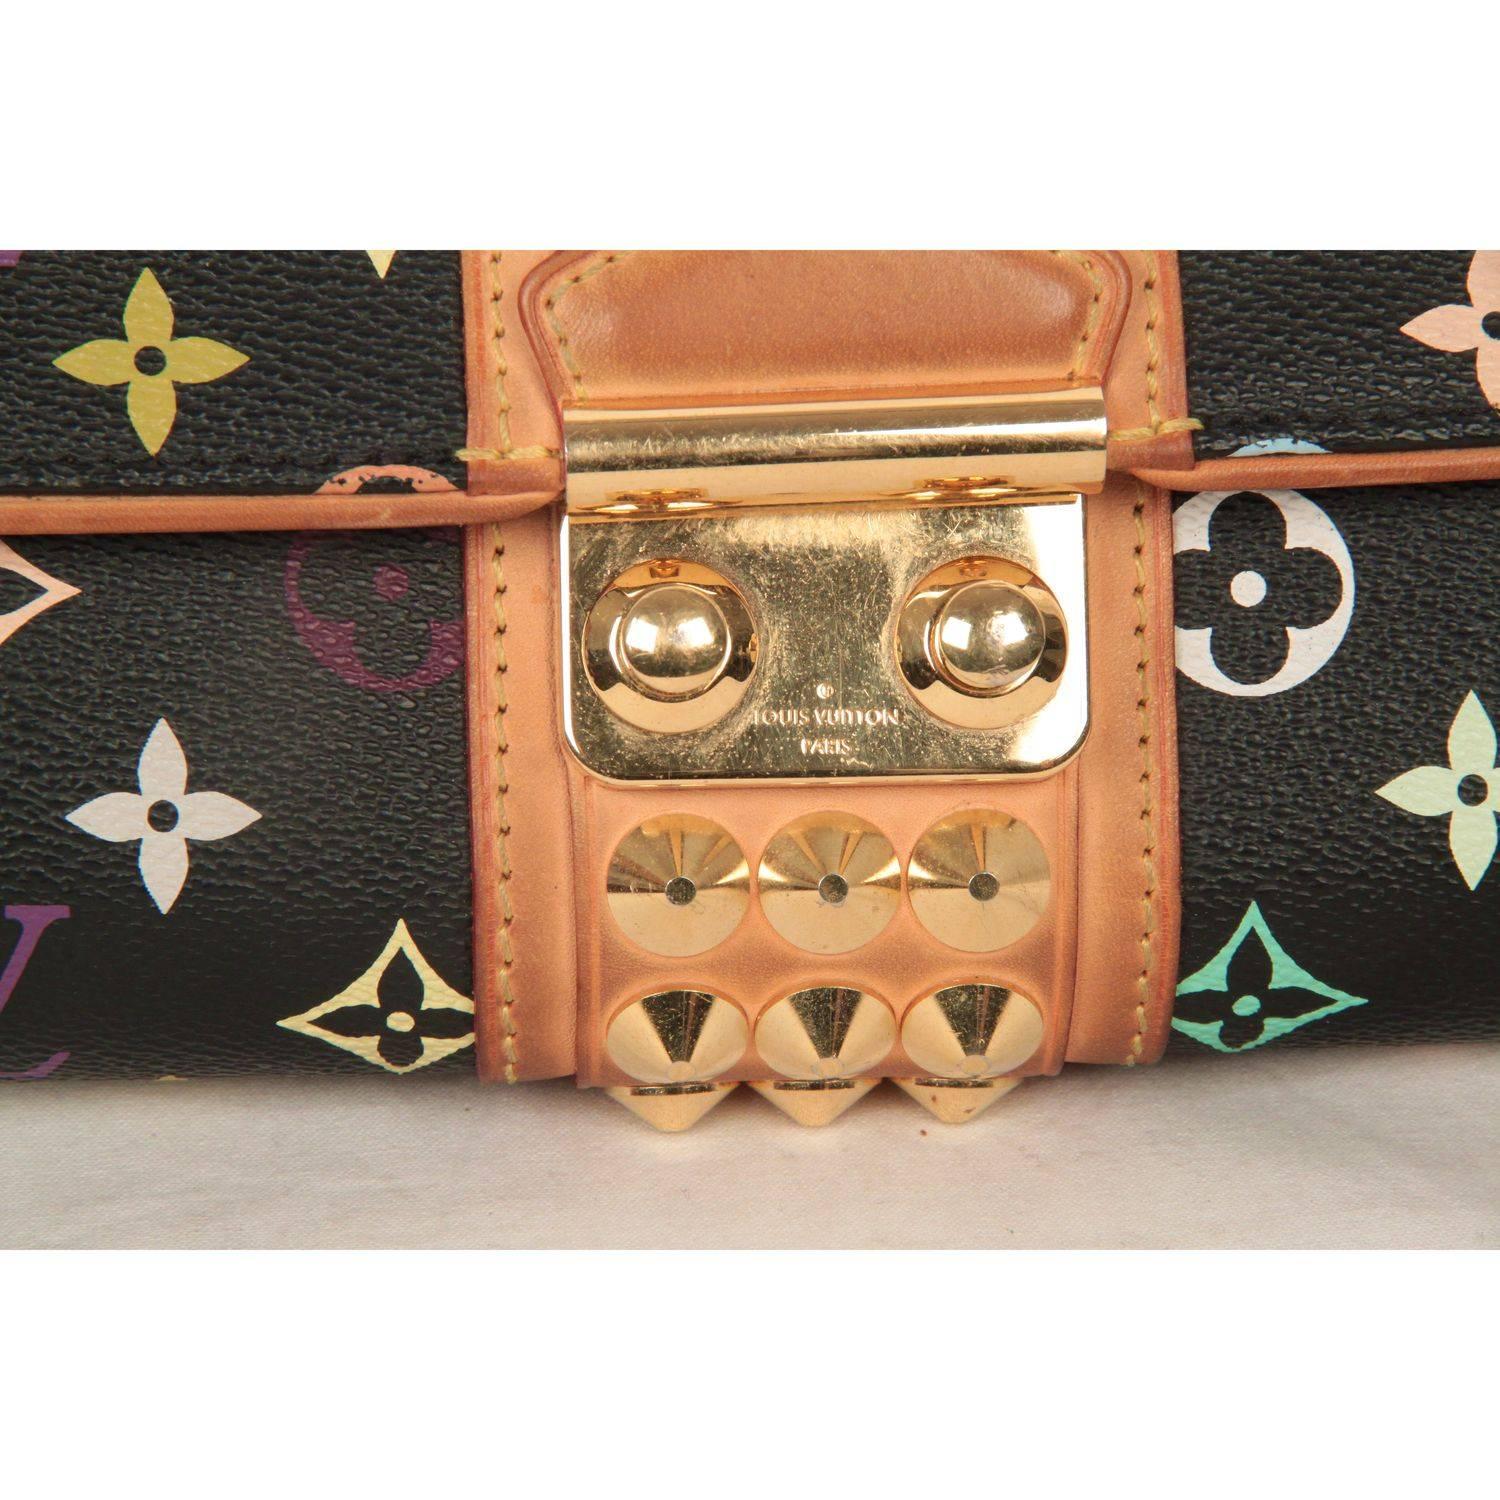 - LOUIS VUITTON 'Courtney' Clutch Bag in Black 'Multicolore' monogram canvas, from the Takashi Murakami Collection.
- Tan leather trim 
- Gold metal spike detaling
- Named after famous rock star Courtney Love
- Flap with push lock closure
- Taupe